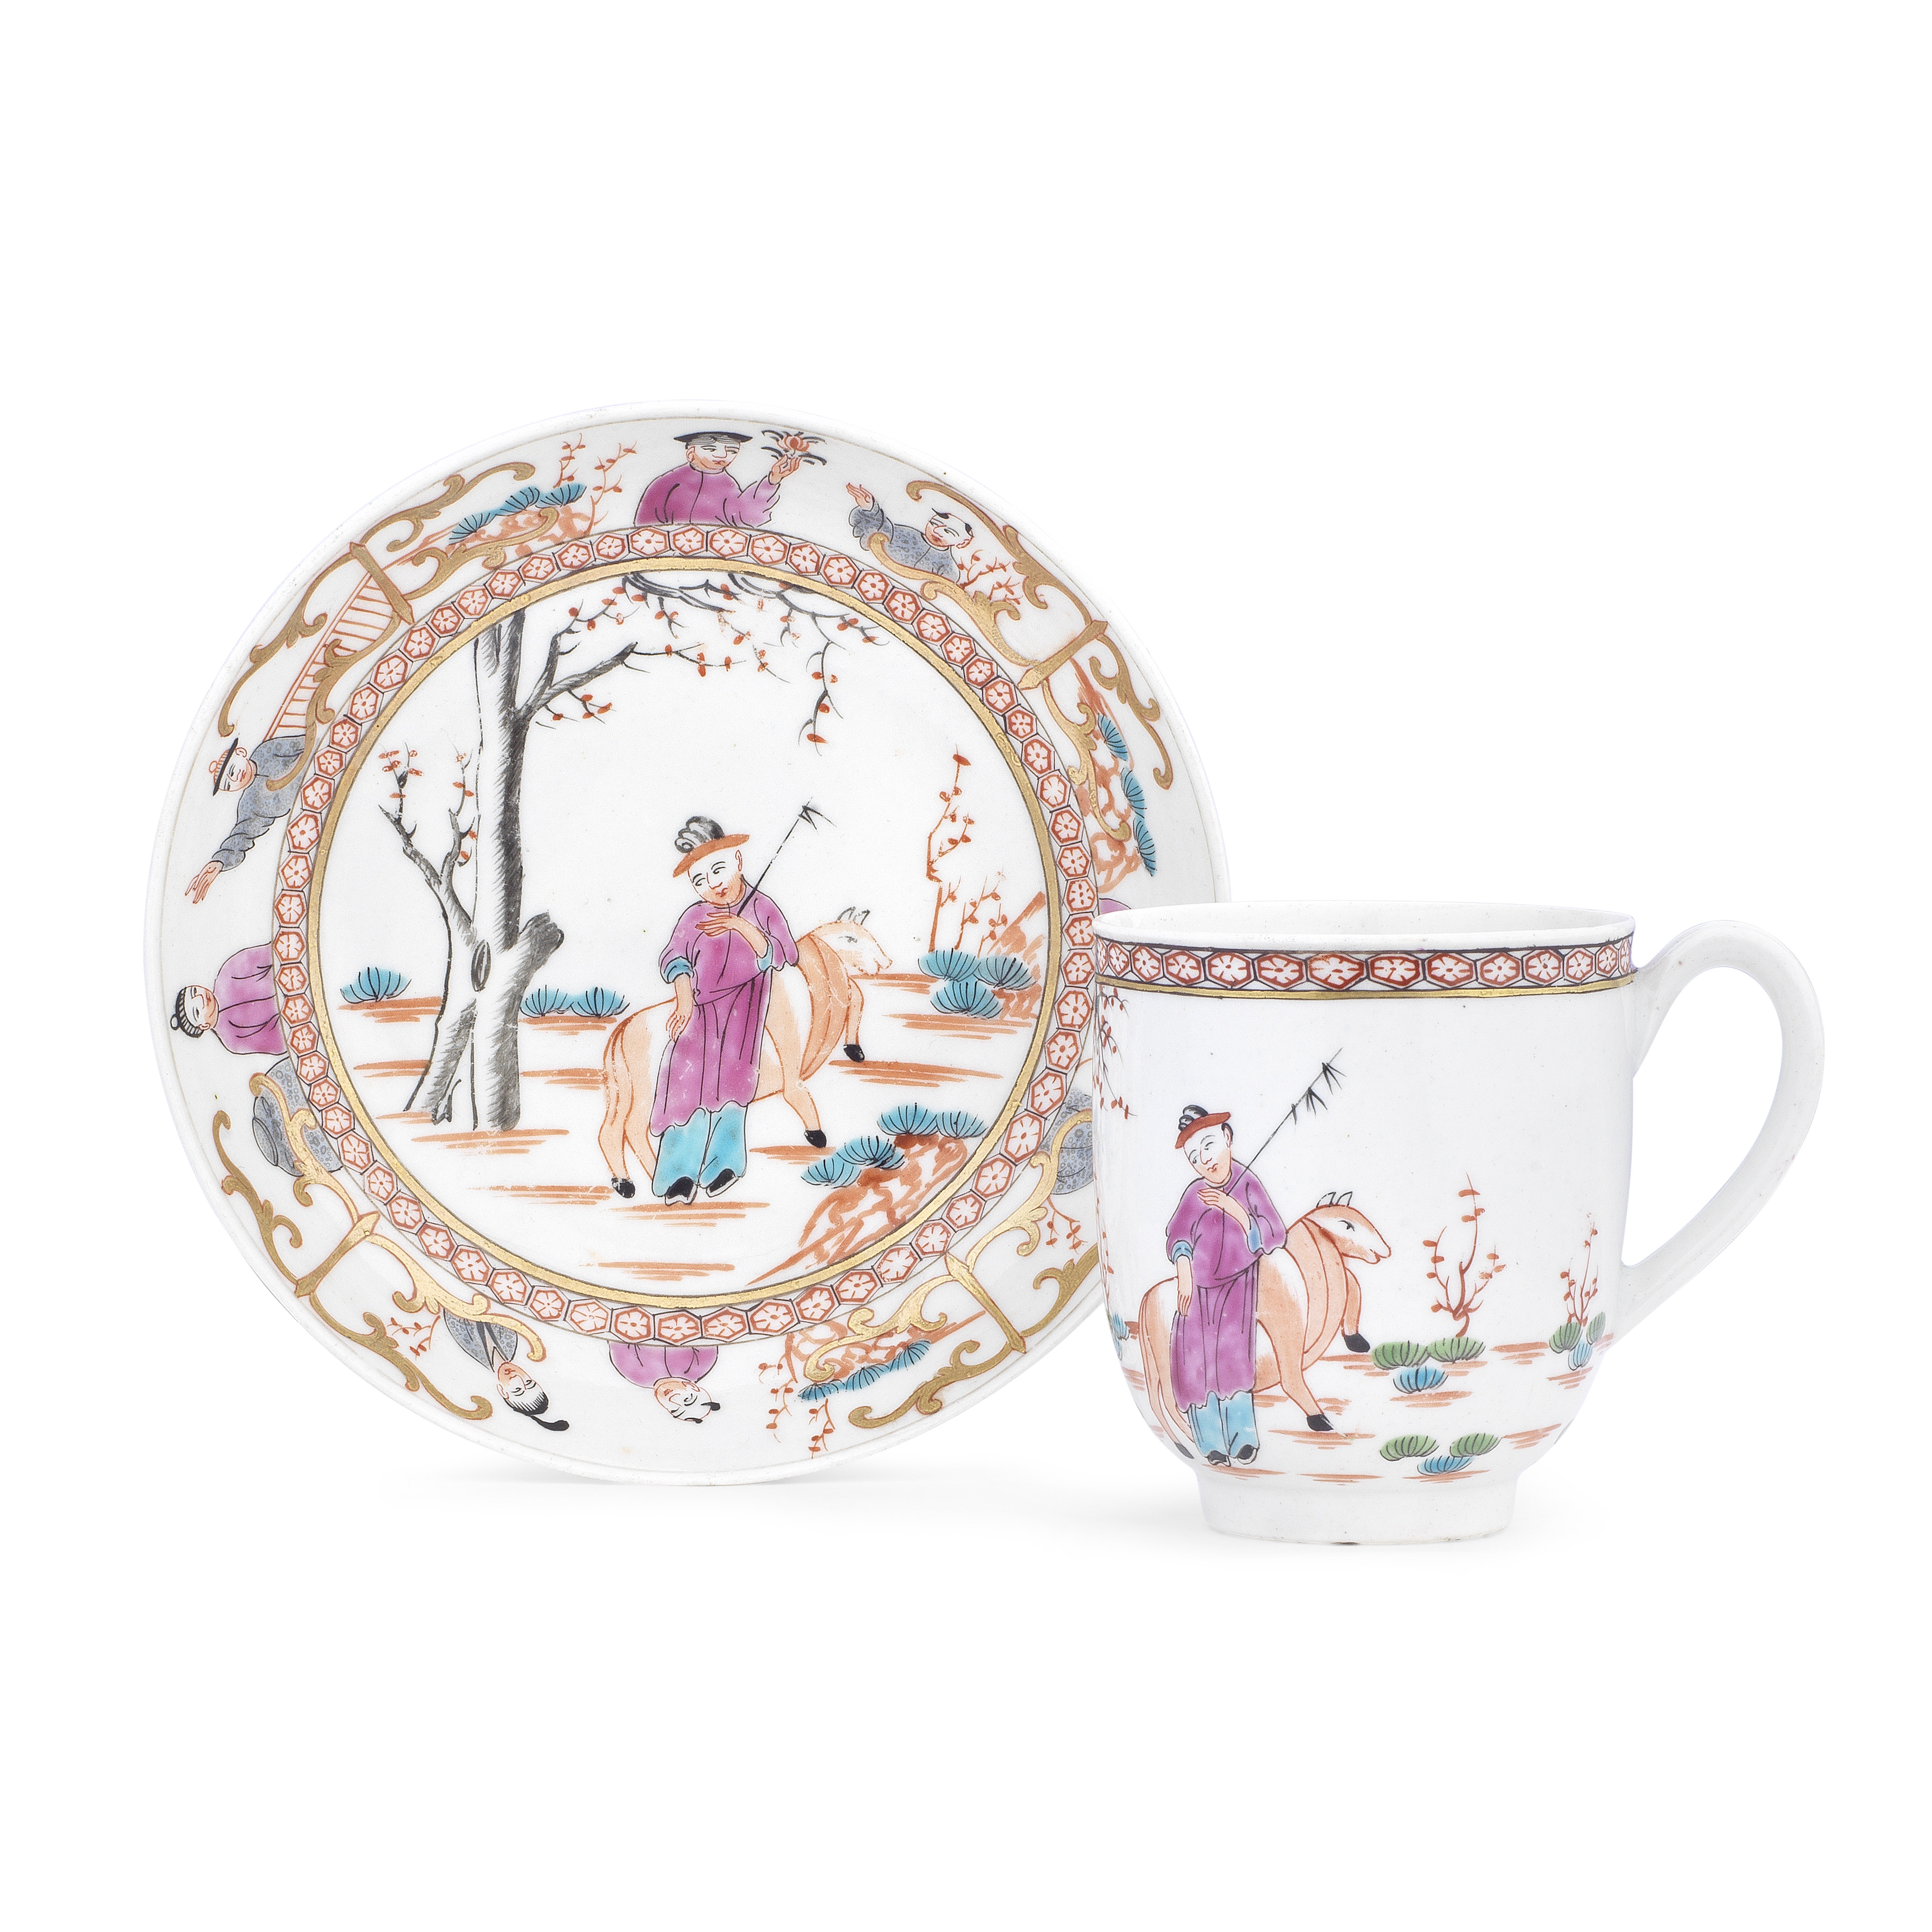 A rare Worcester coffee cup and saucer, circa 1768-72